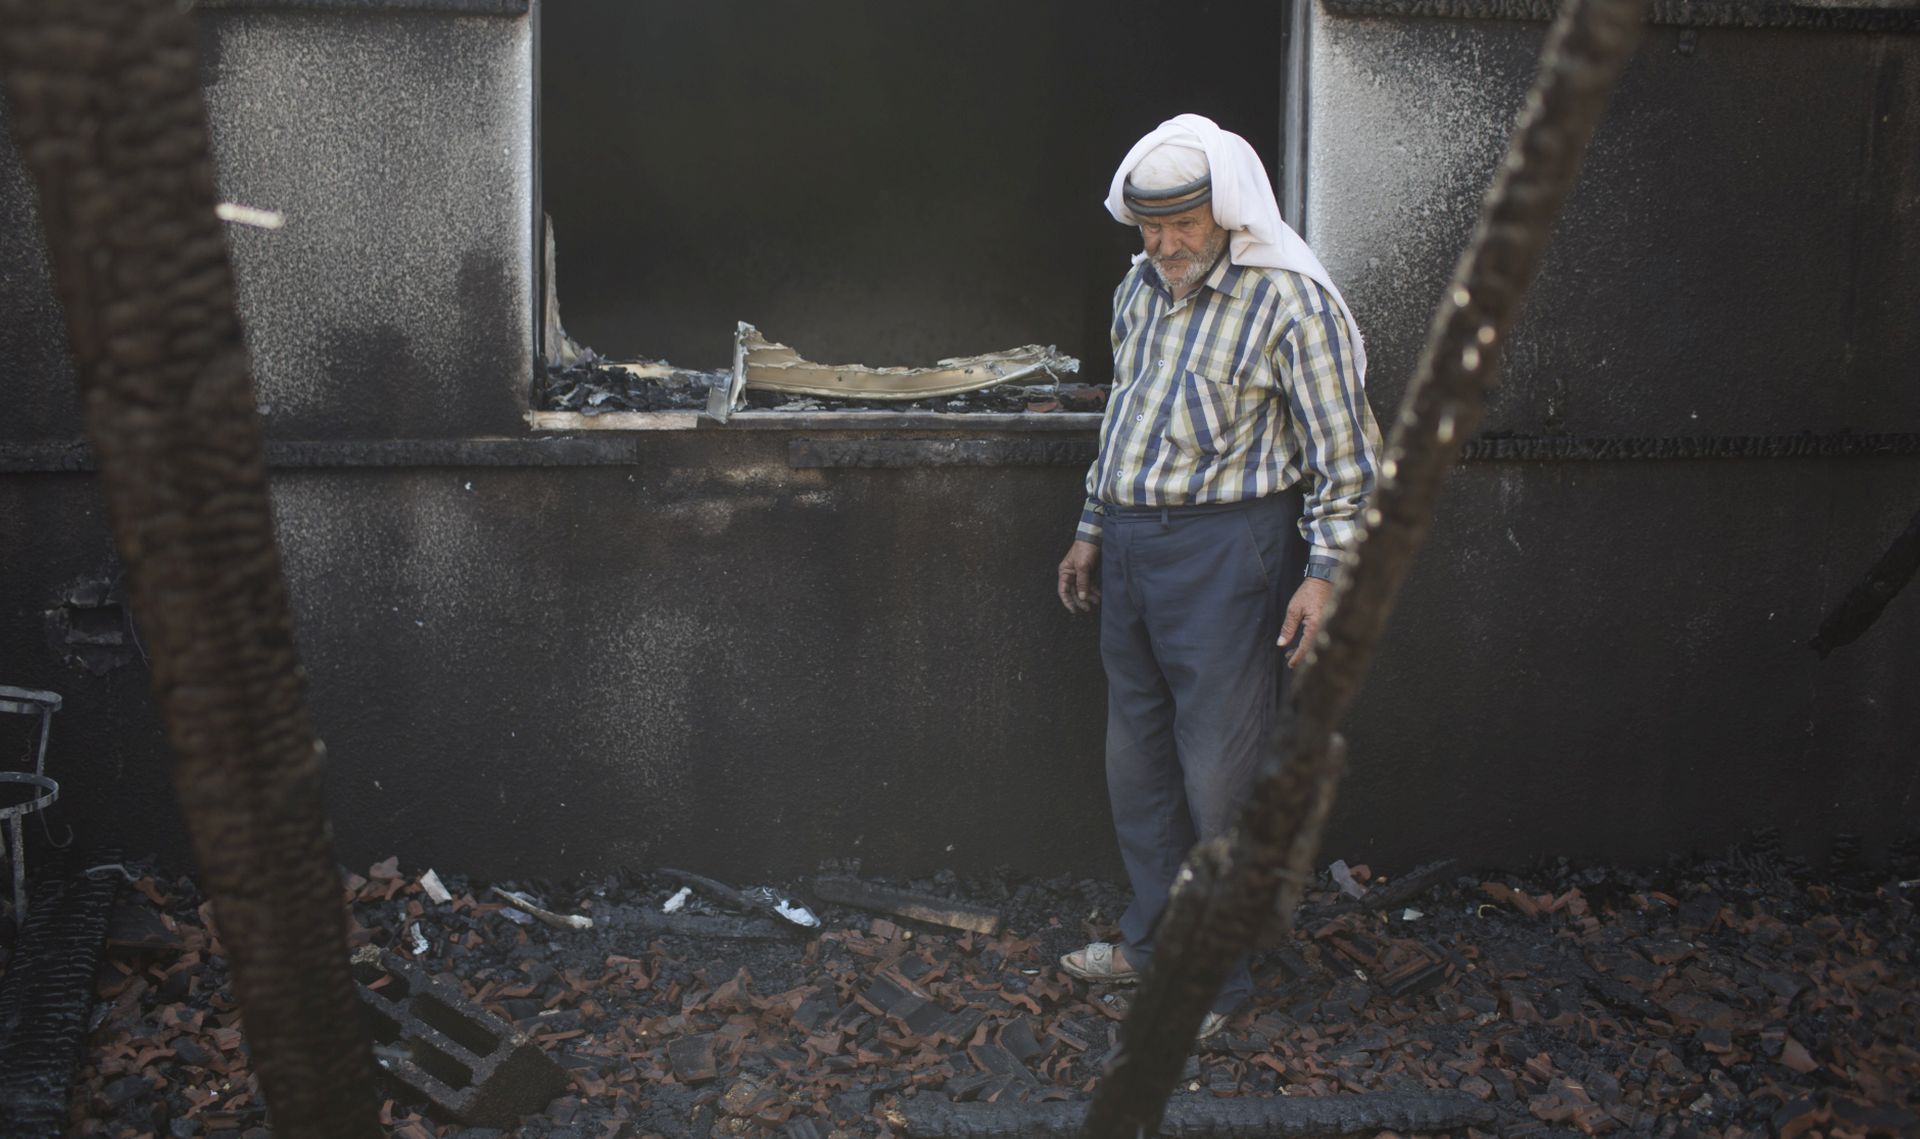 DUMA,WEST BANK - JULY 31:   Family members and relatives of 18 month old baby, Ali Saad-Dawabsheh, view the remains of their house after a fire which was suspected to have been set by Jewish extremists on July 31, 2015 in the Palestinian village of Duma, West Bank.  A house fire in the Palestinian village of Duma, West Bank, suspected to have been set by Jewish extremists, killed an 18-month-old Palestinian child, injured both parents and a four year old brother. (Photo by Oren Ziv/Getty Images)